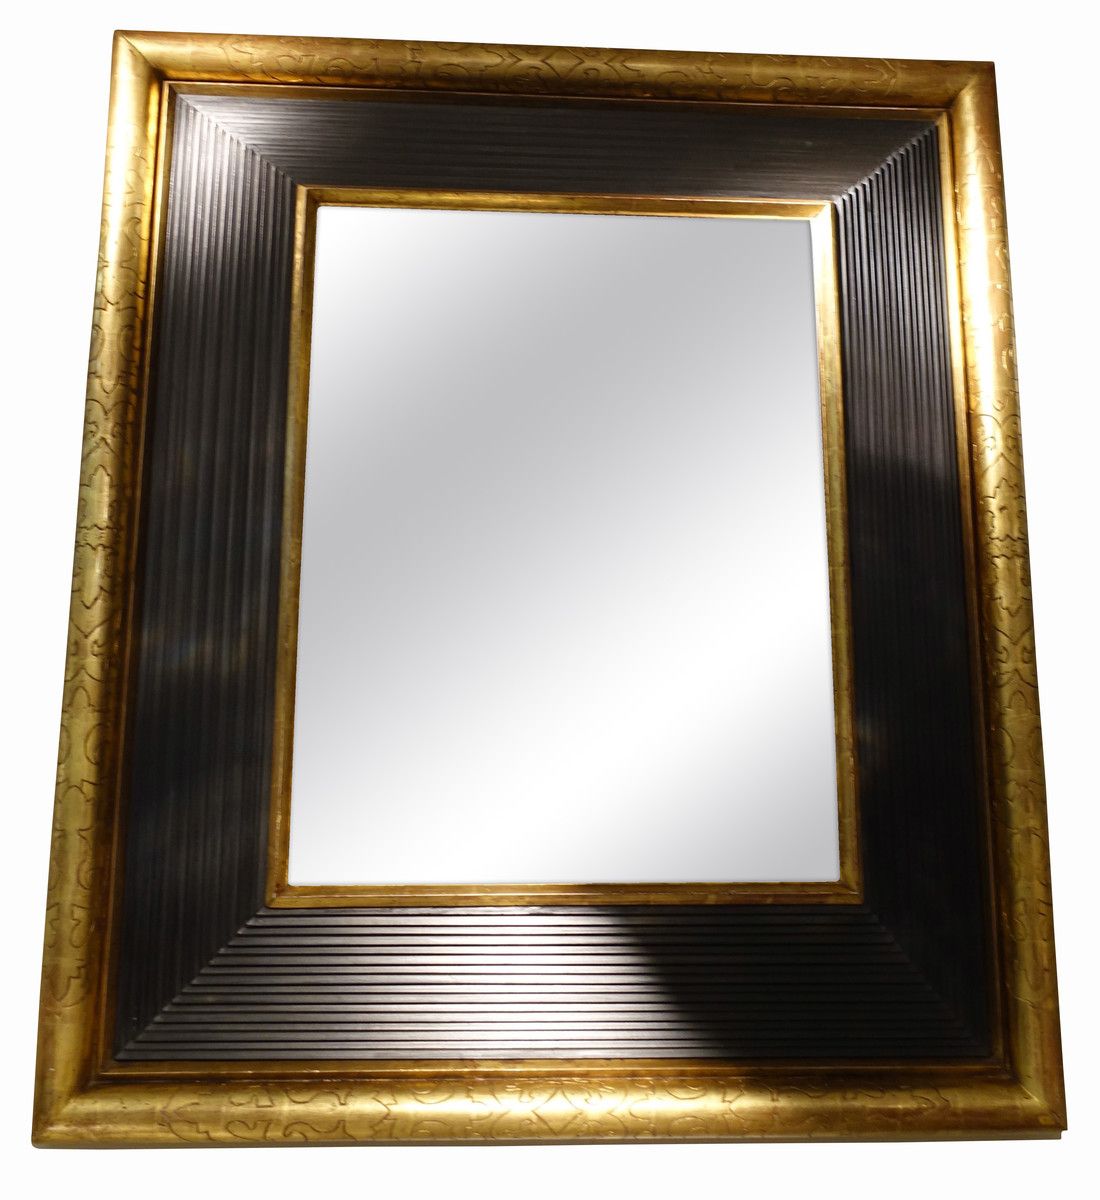 Balsamo Antiques | 1850c French Gold / Black Framed Mirror Intended For Antique Gold Etched Wall Mirrors (View 15 of 15)